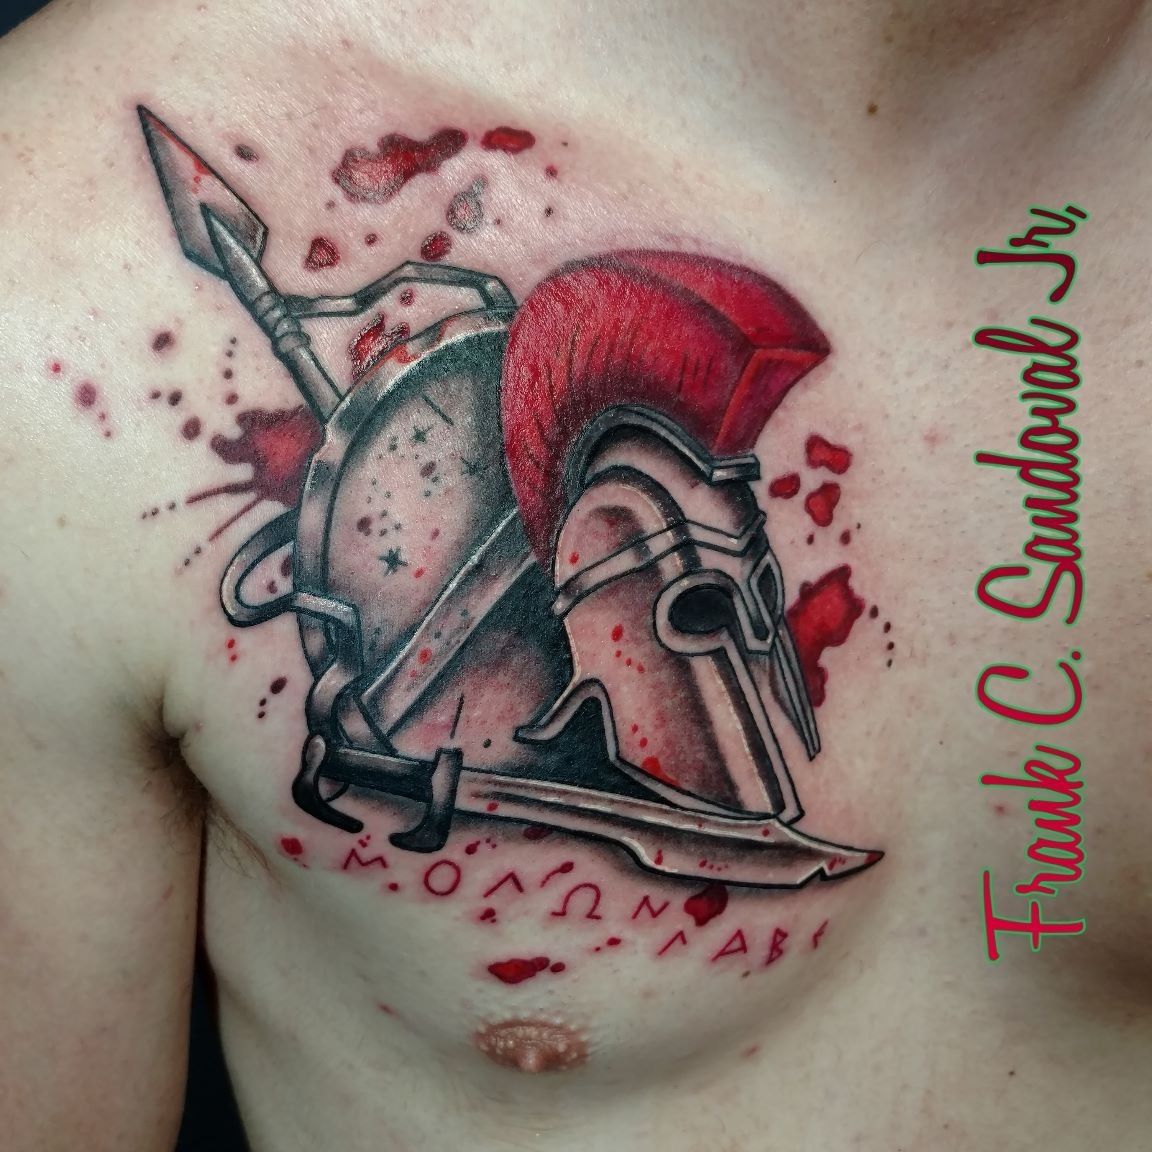 Gladiator Themed Chest Piece